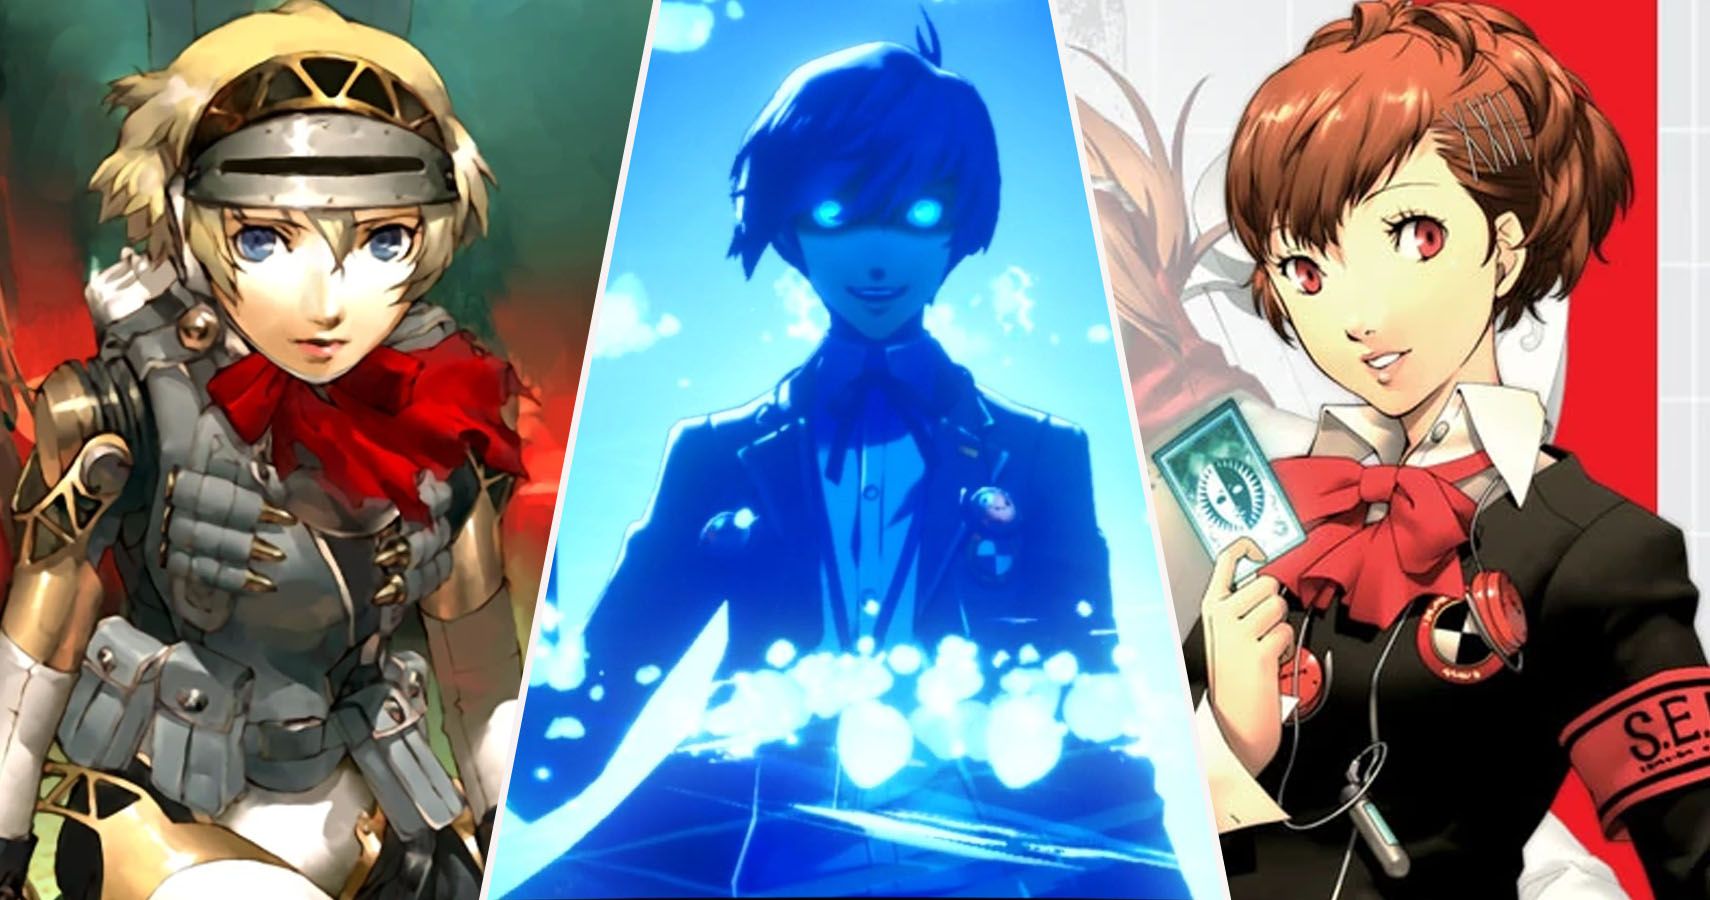 Persona 3: Reload Looks Like It's Getting FES Expansion After All - IGN